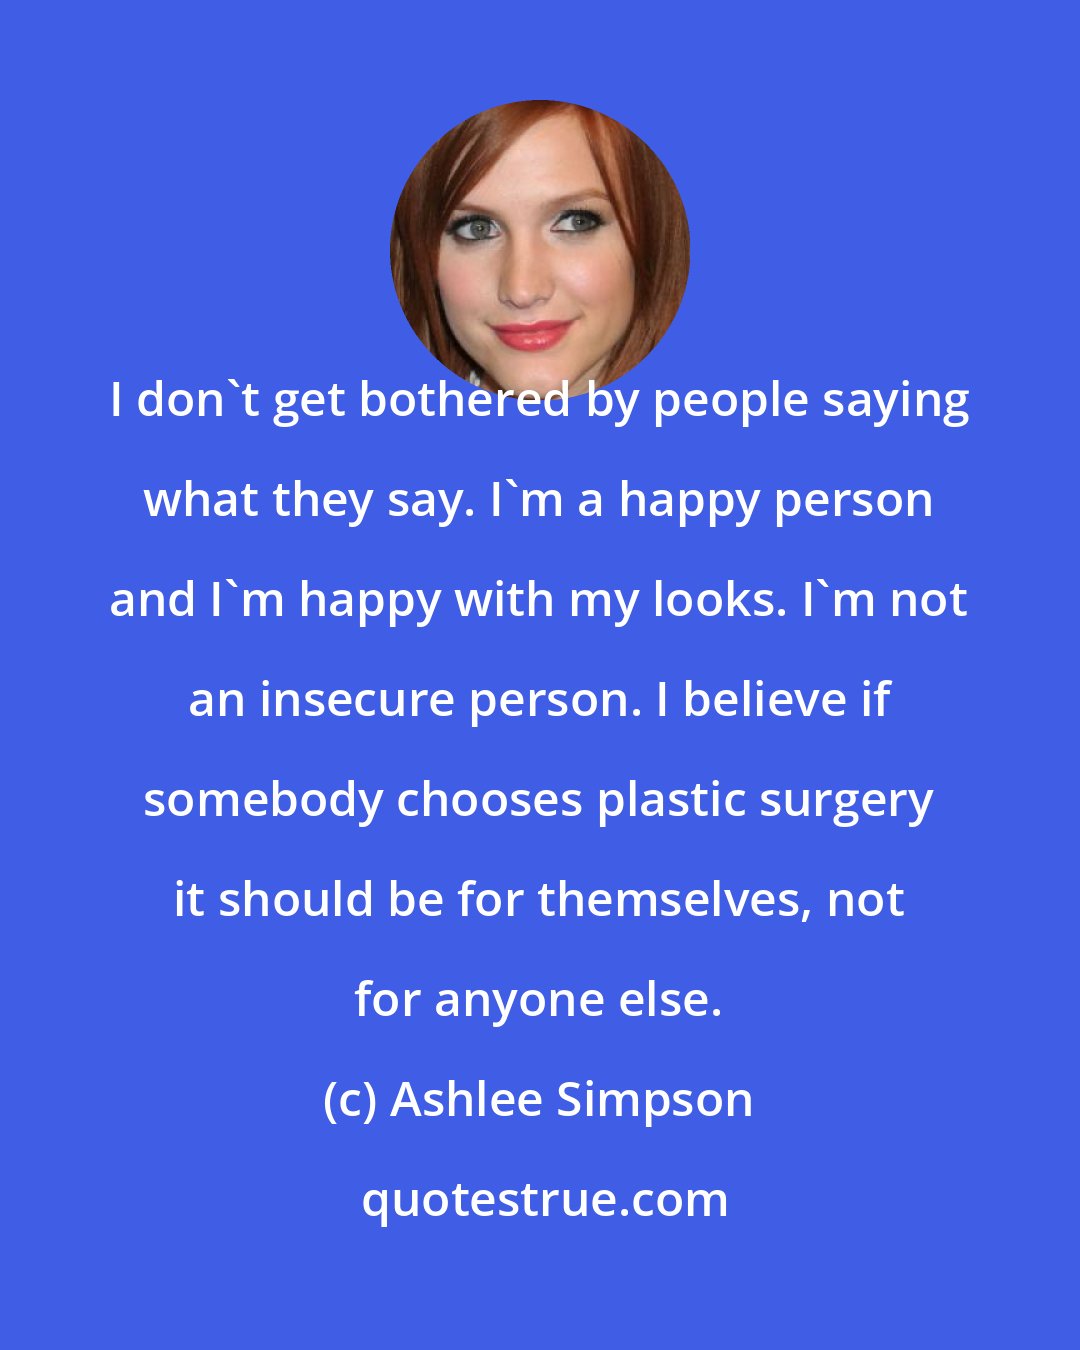 Ashlee Simpson: I don't get bothered by people saying what they say. I'm a happy person and I'm happy with my looks. I'm not an insecure person. I believe if somebody chooses plastic surgery it should be for themselves, not for anyone else.